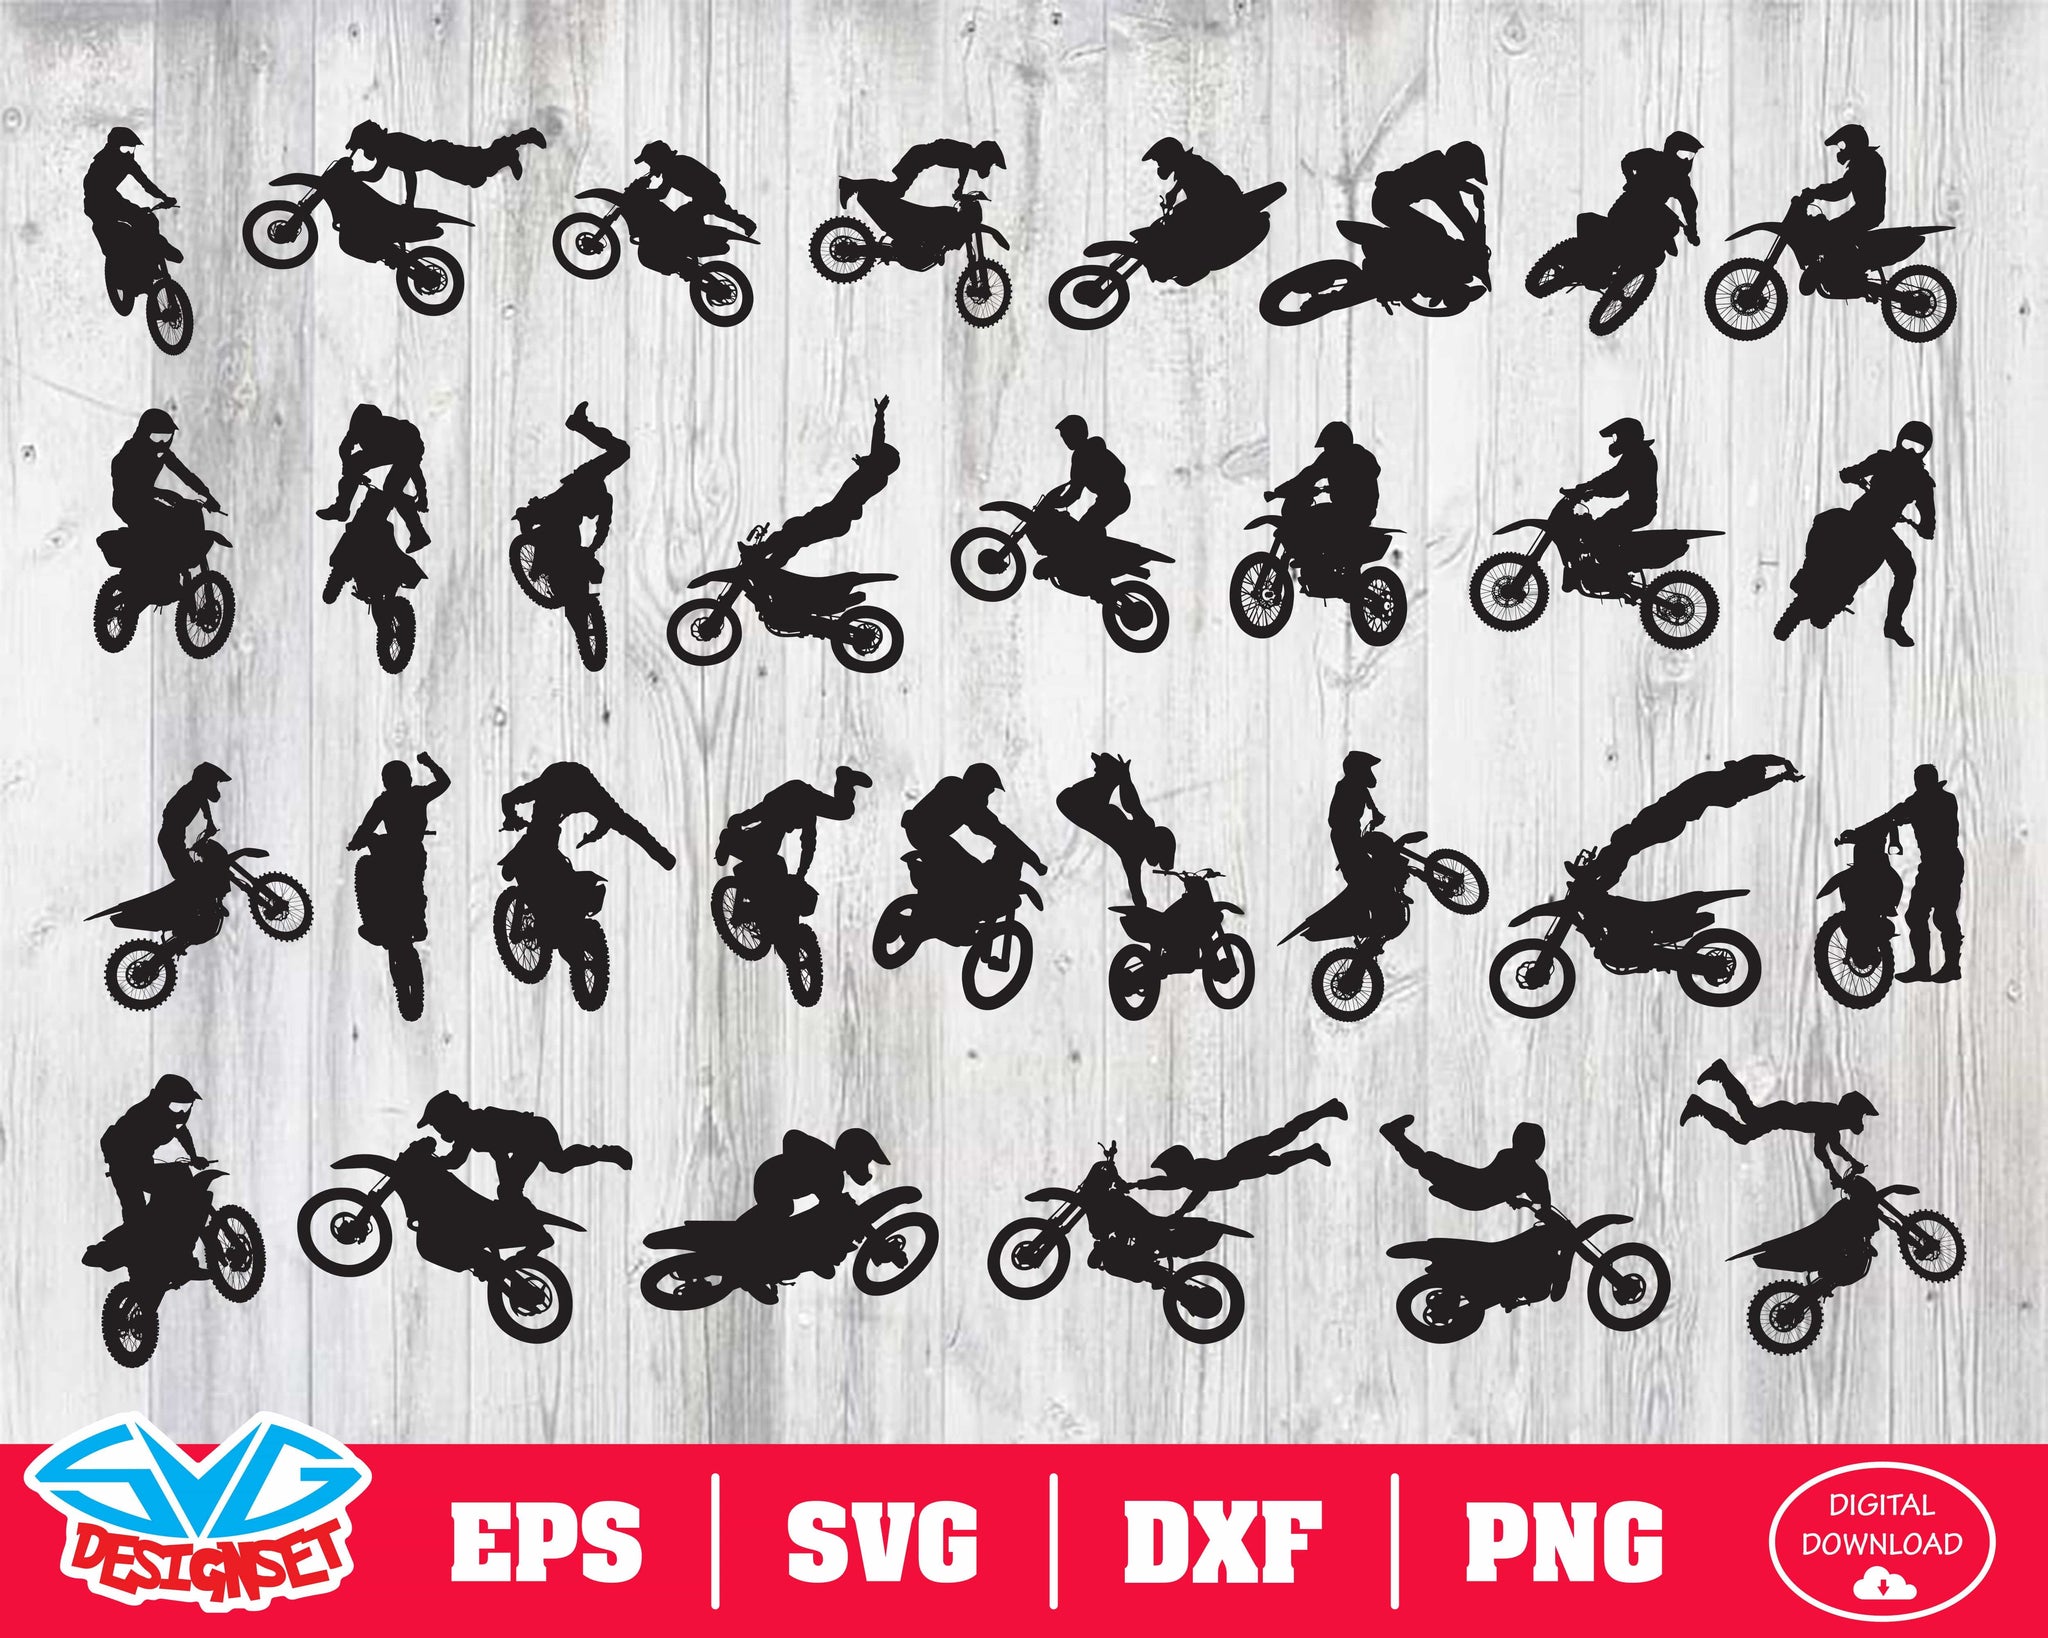 Motocross Svg, Dxf, Eps, Png, Clipart, Silhouette and Cutfiles - SVGDesignSets